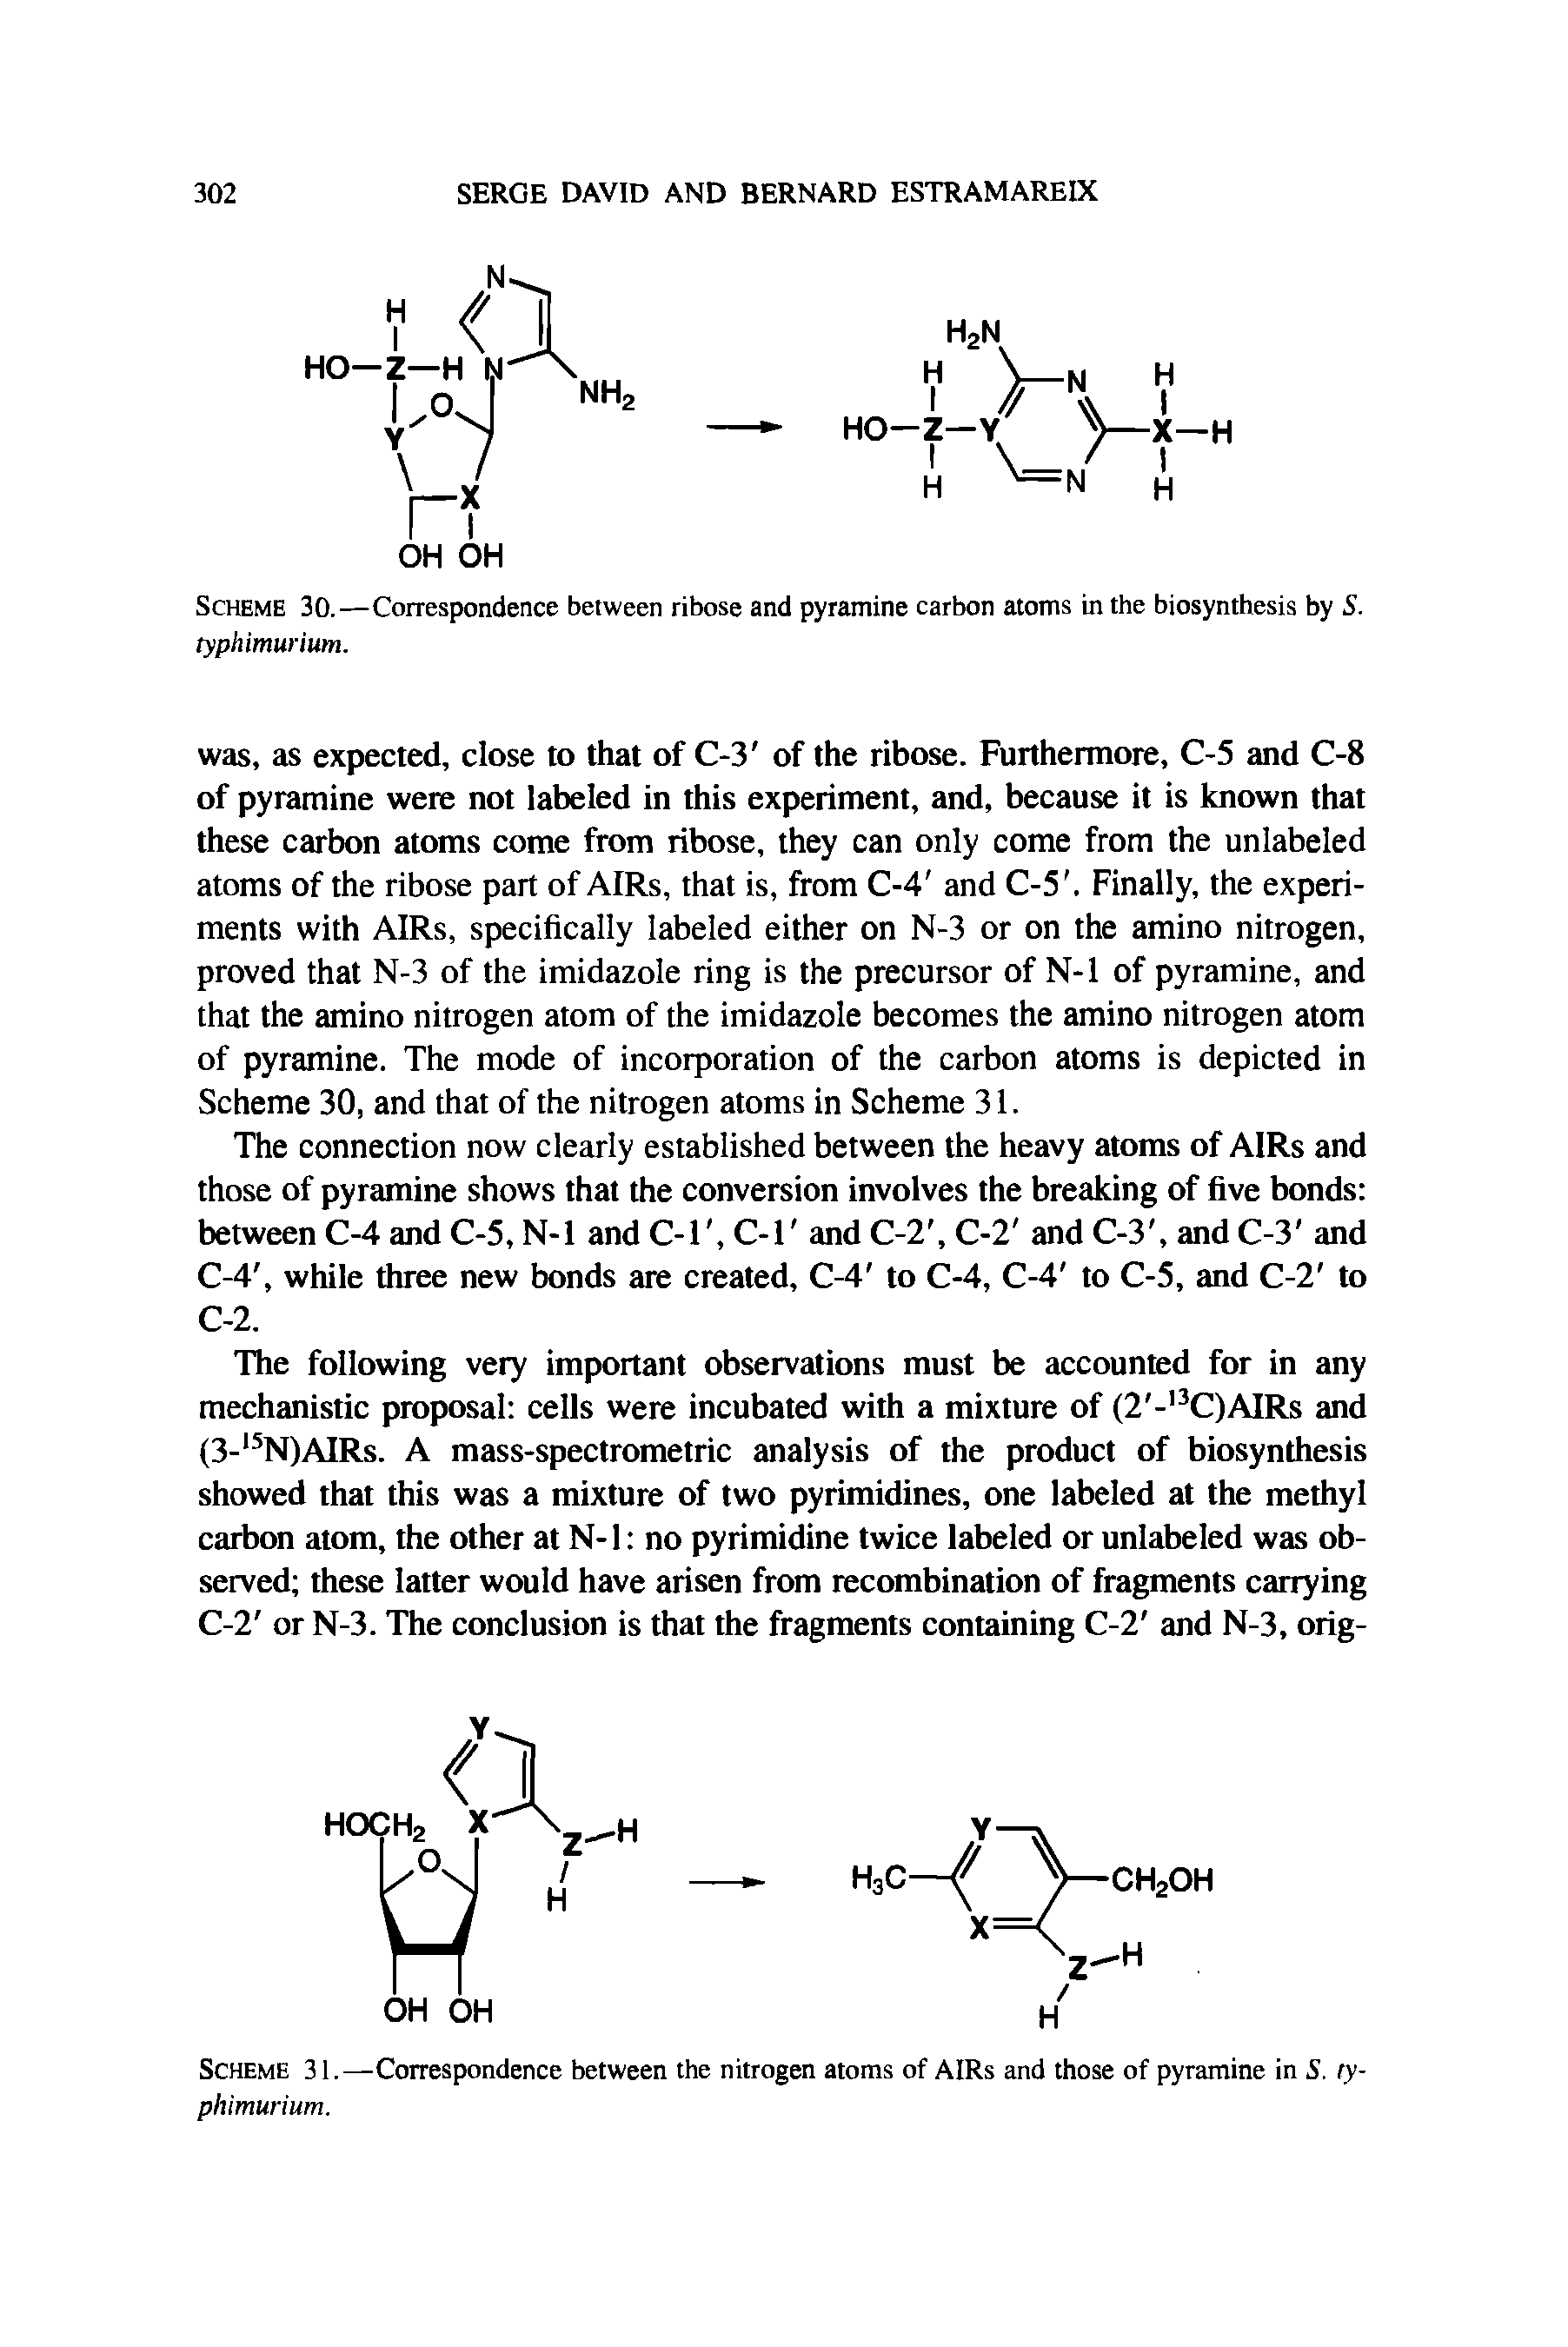 Scheme 30.—Correspondence between ribose and pyramine carbon atoms in the biosynthesis by S. typhimurium.